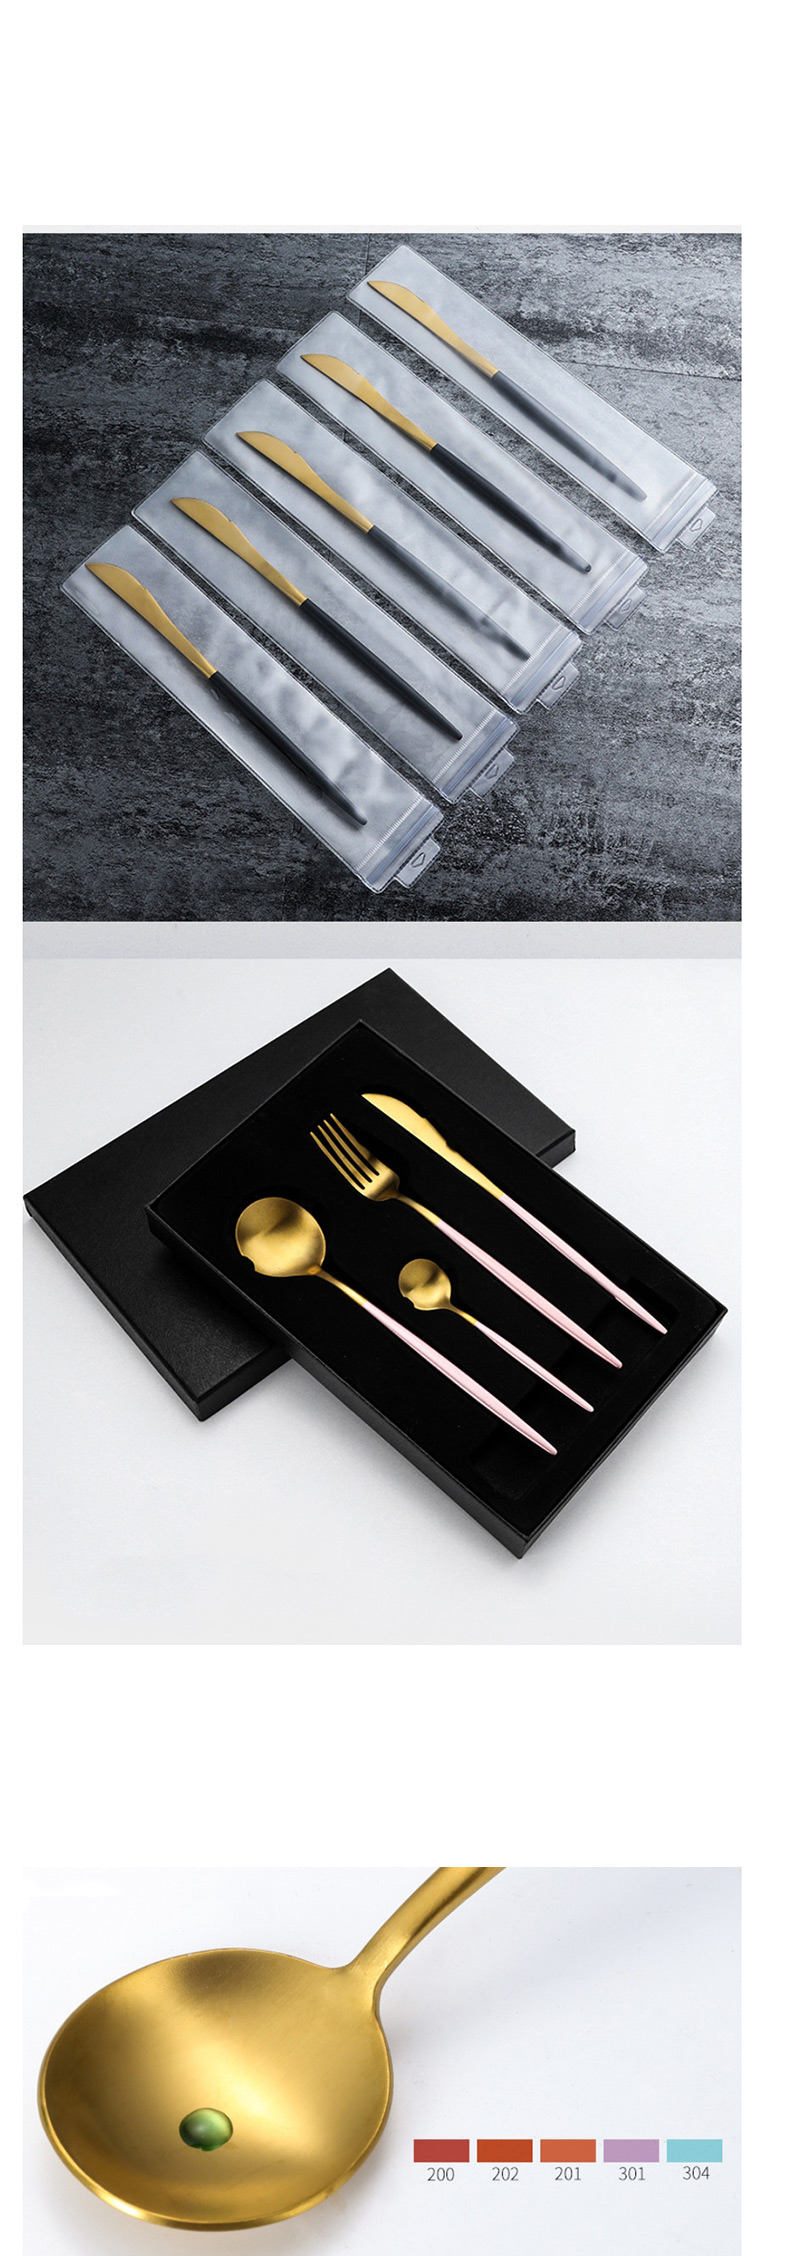 Fashion Rose Gold 4 Piece Set (cutlery Spoon + Coffee Spoon) 304 Stainless Steel Cutlery Cutlery Set,Kitchen